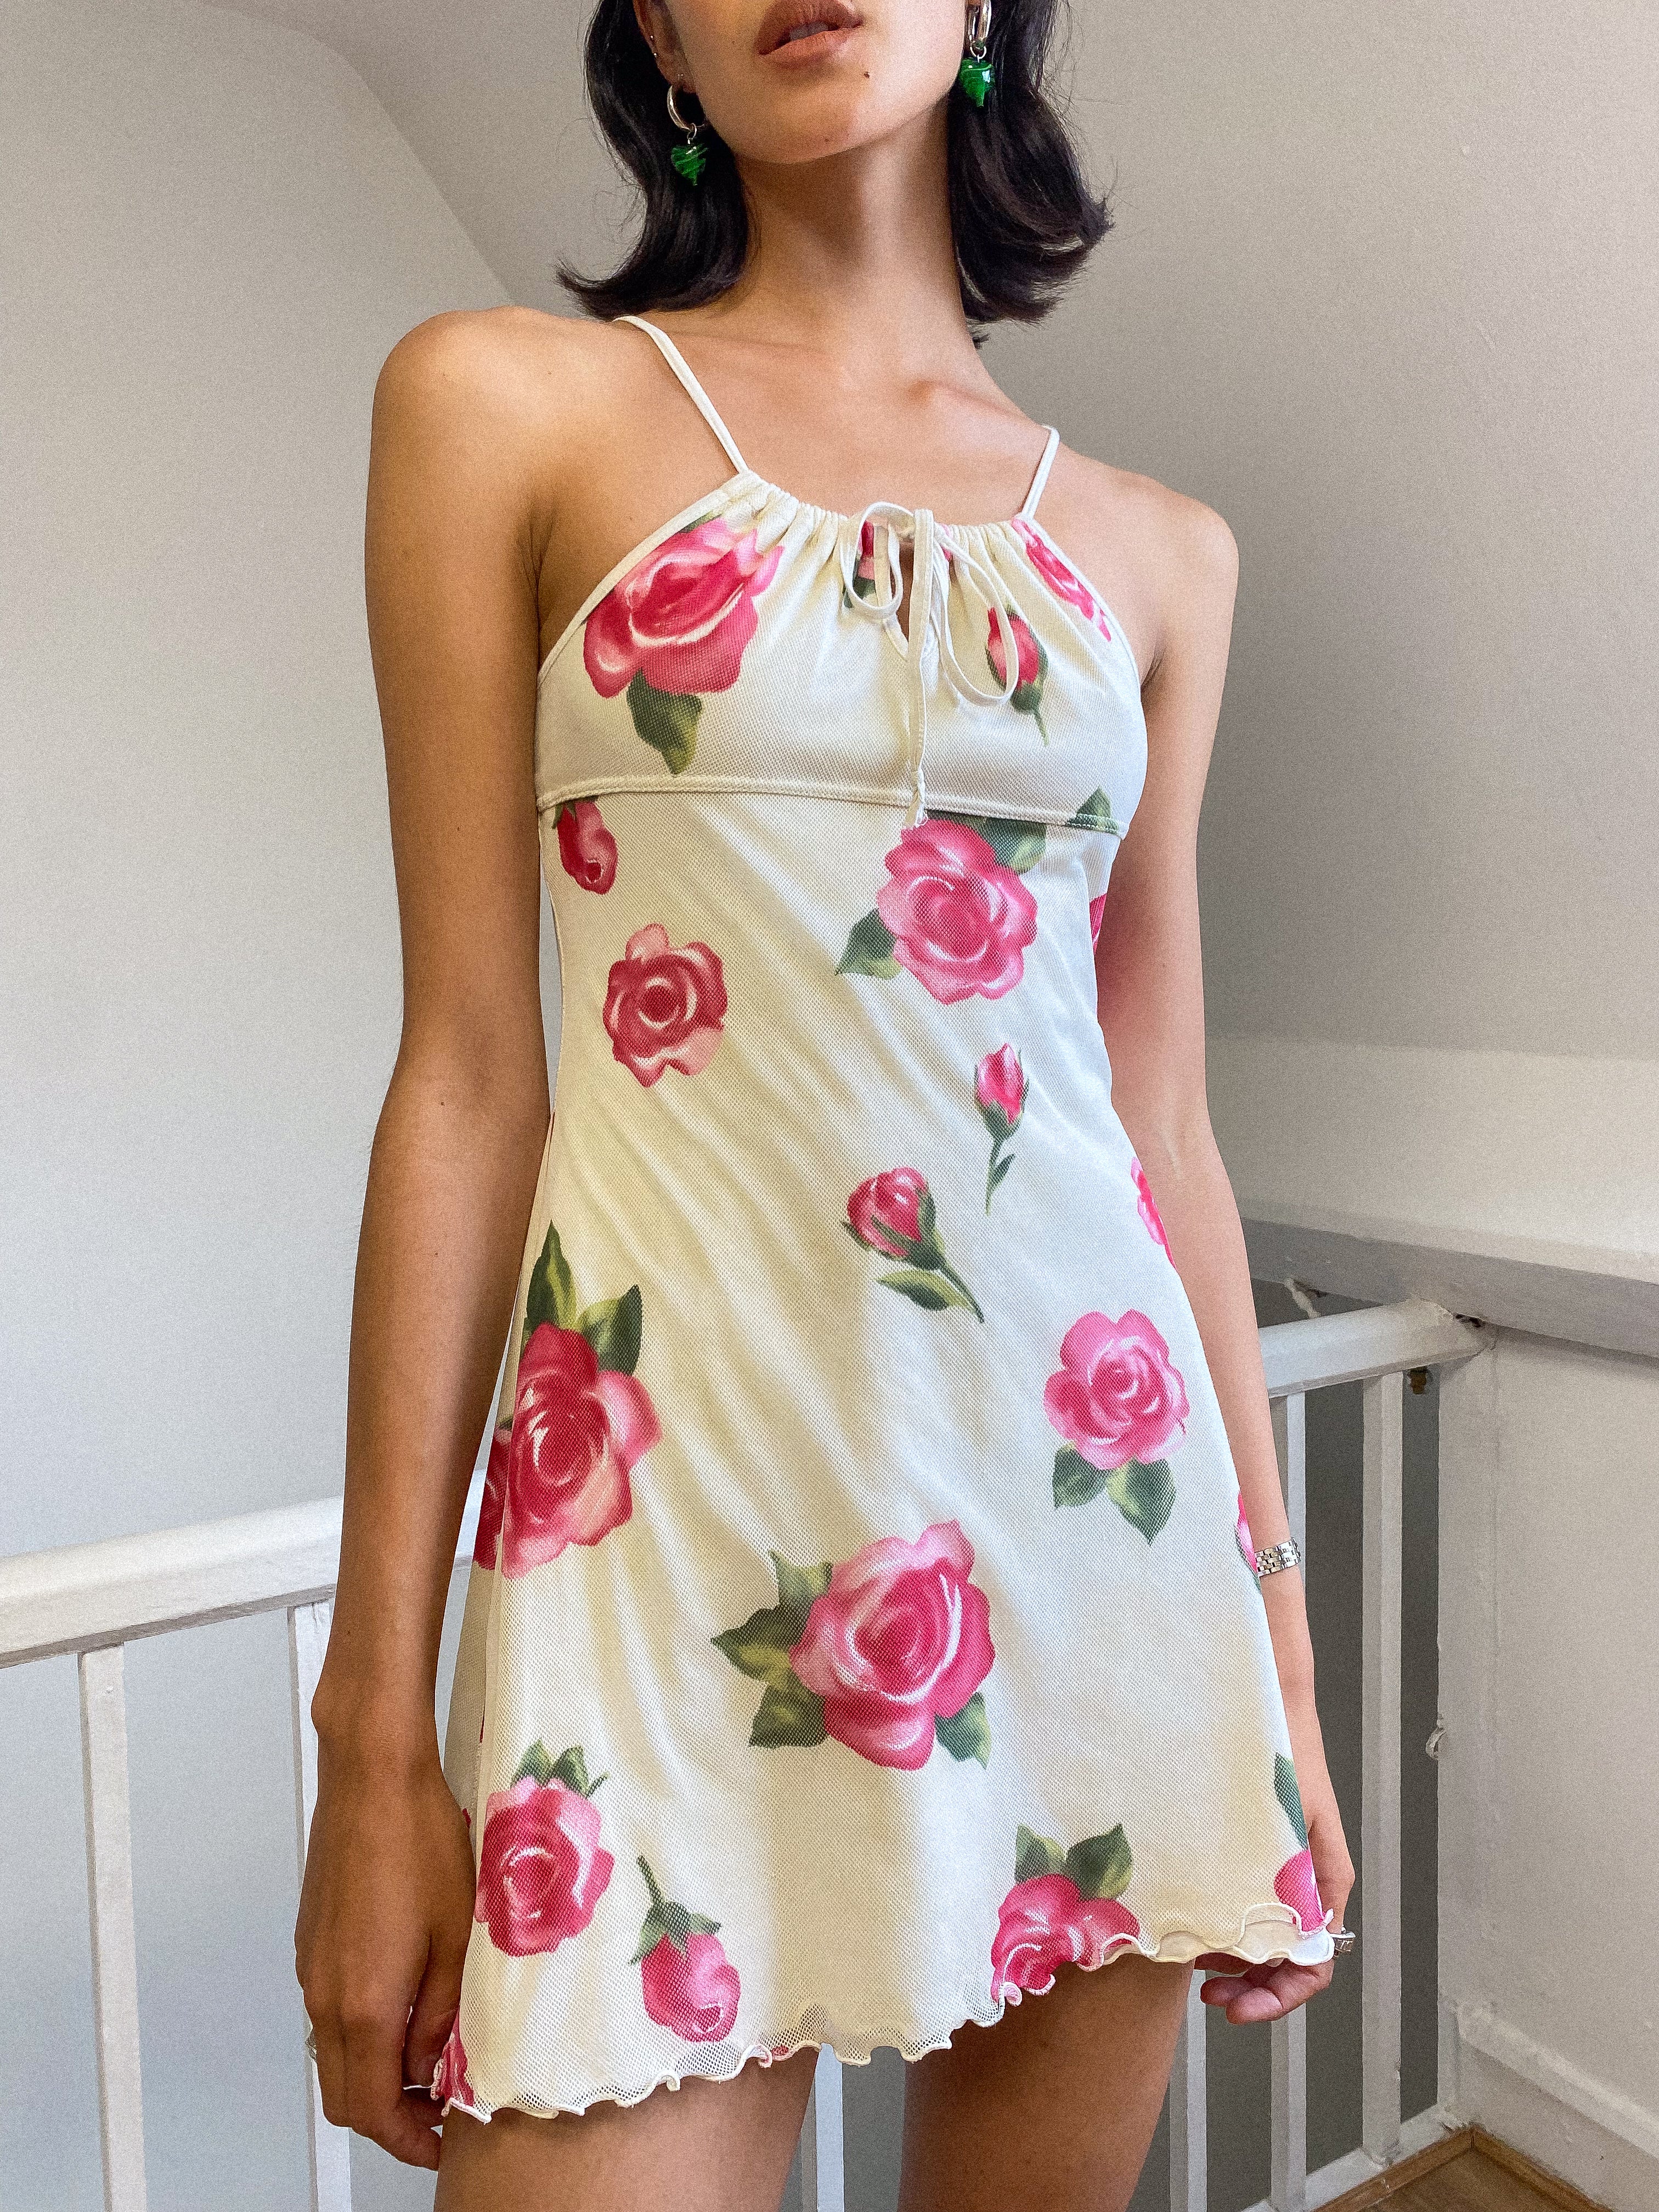 Floral dress from Miss Blumarine with large rose print on mesh fabric. Lined with stretch cotton. Aline shape, unique adjustable strap that ties at bust to effect length of straps.